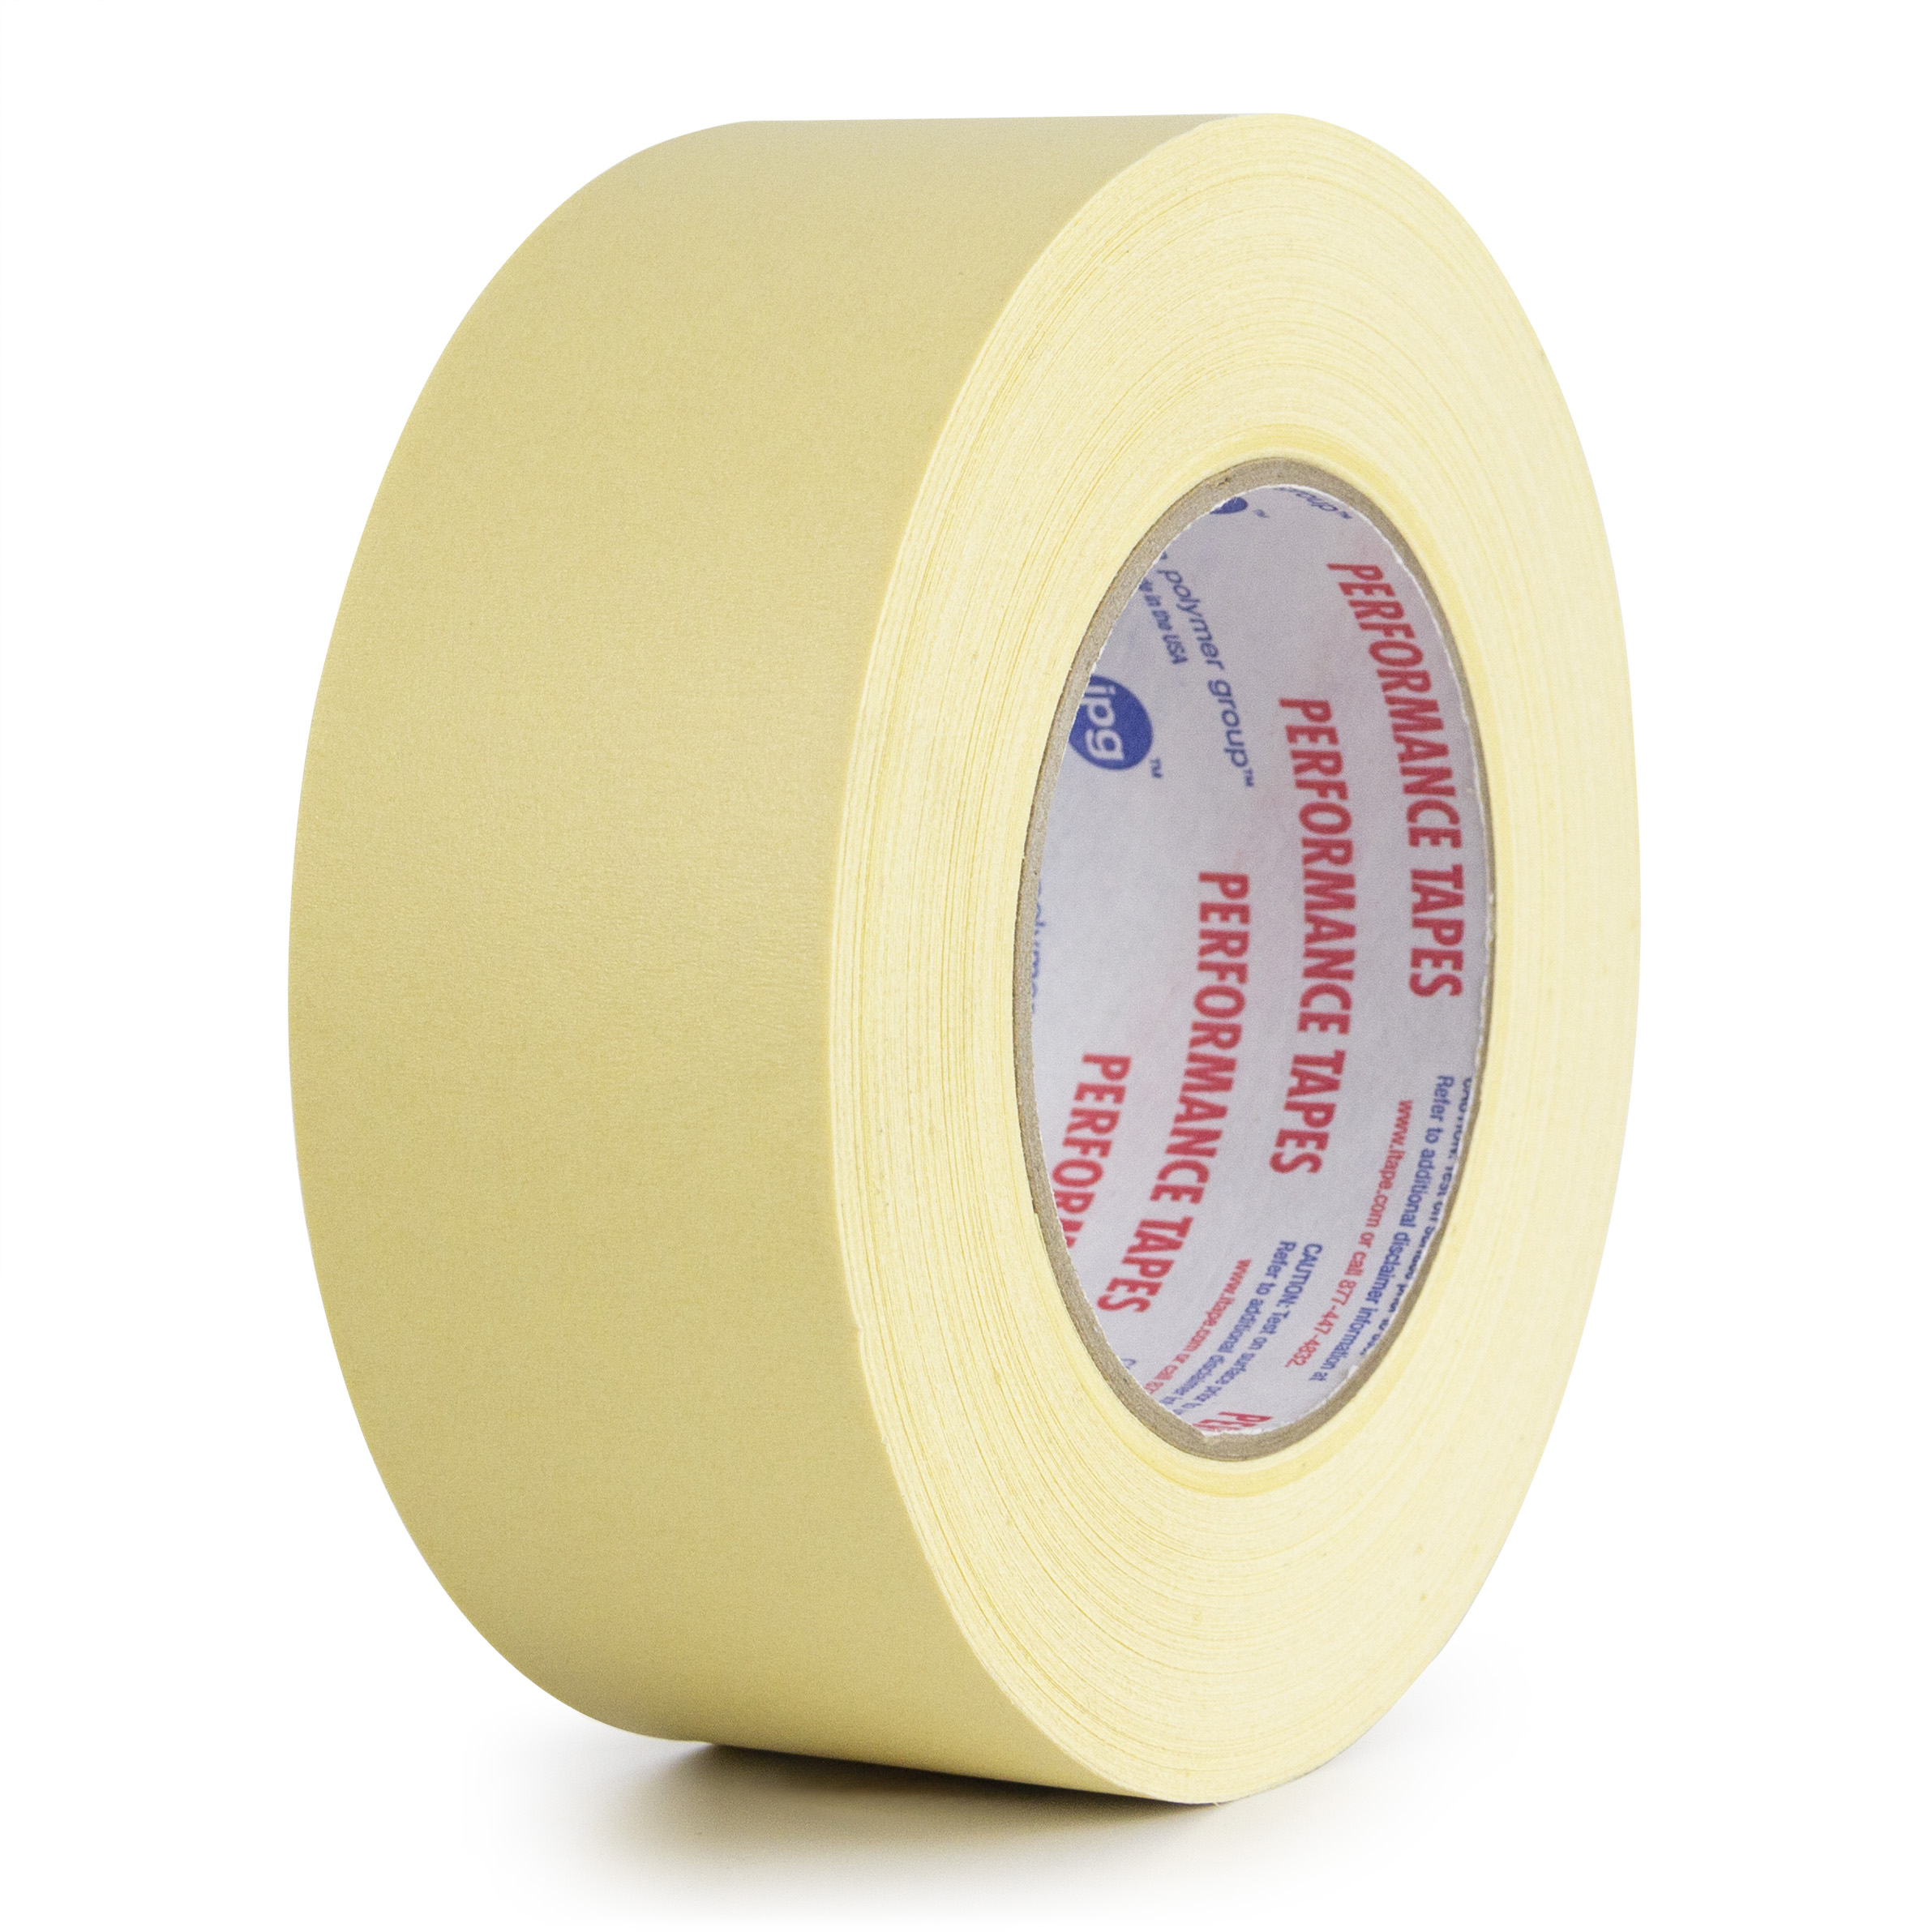 Hot Melt Adhesive Tape, Adhesive Fastener Tape, Tape Release Protector